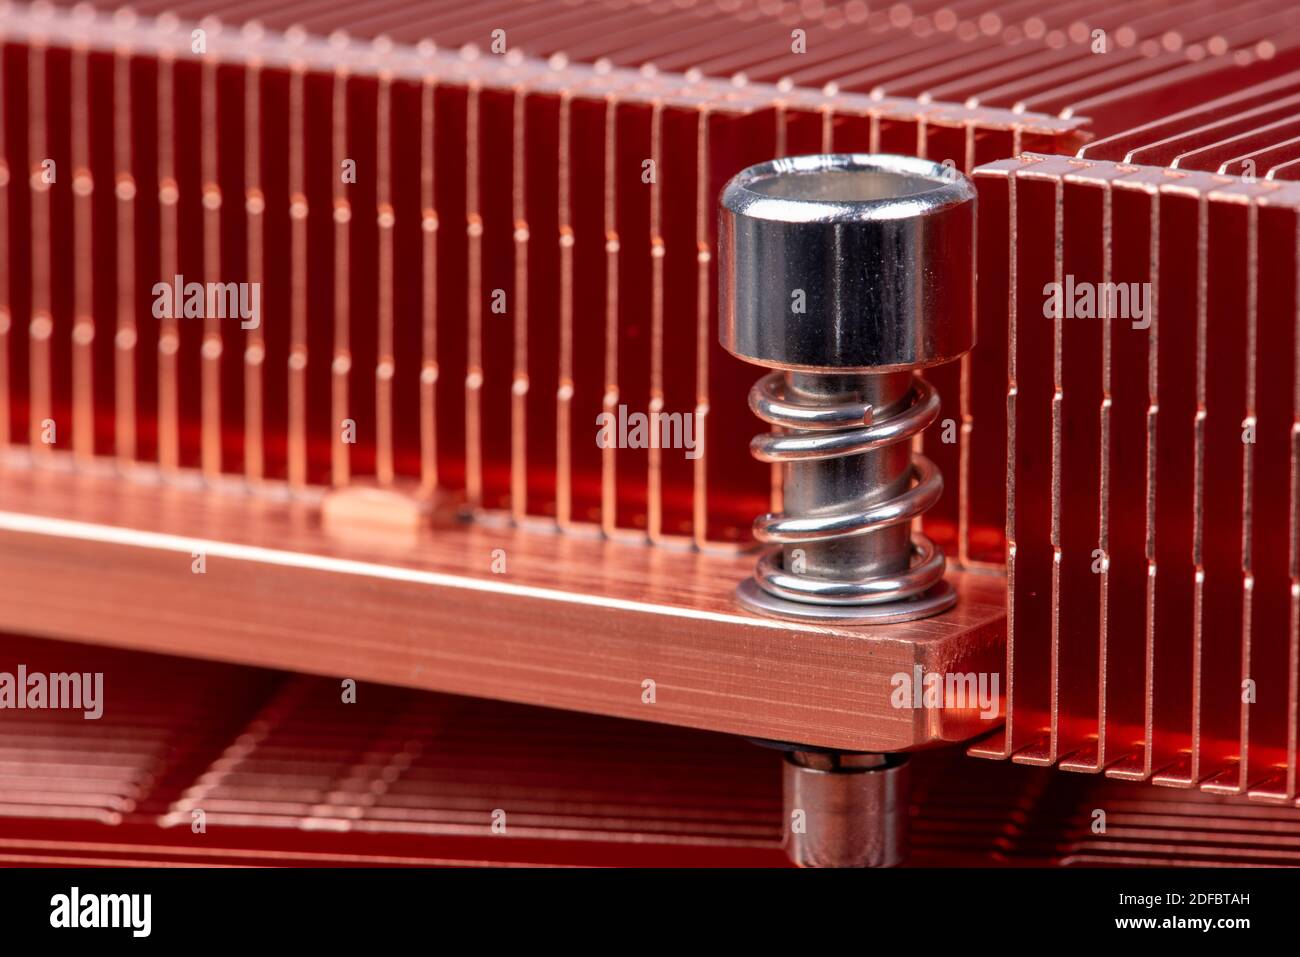 Passive copper heat sinks radiator used to cool electronics components Stock Photo